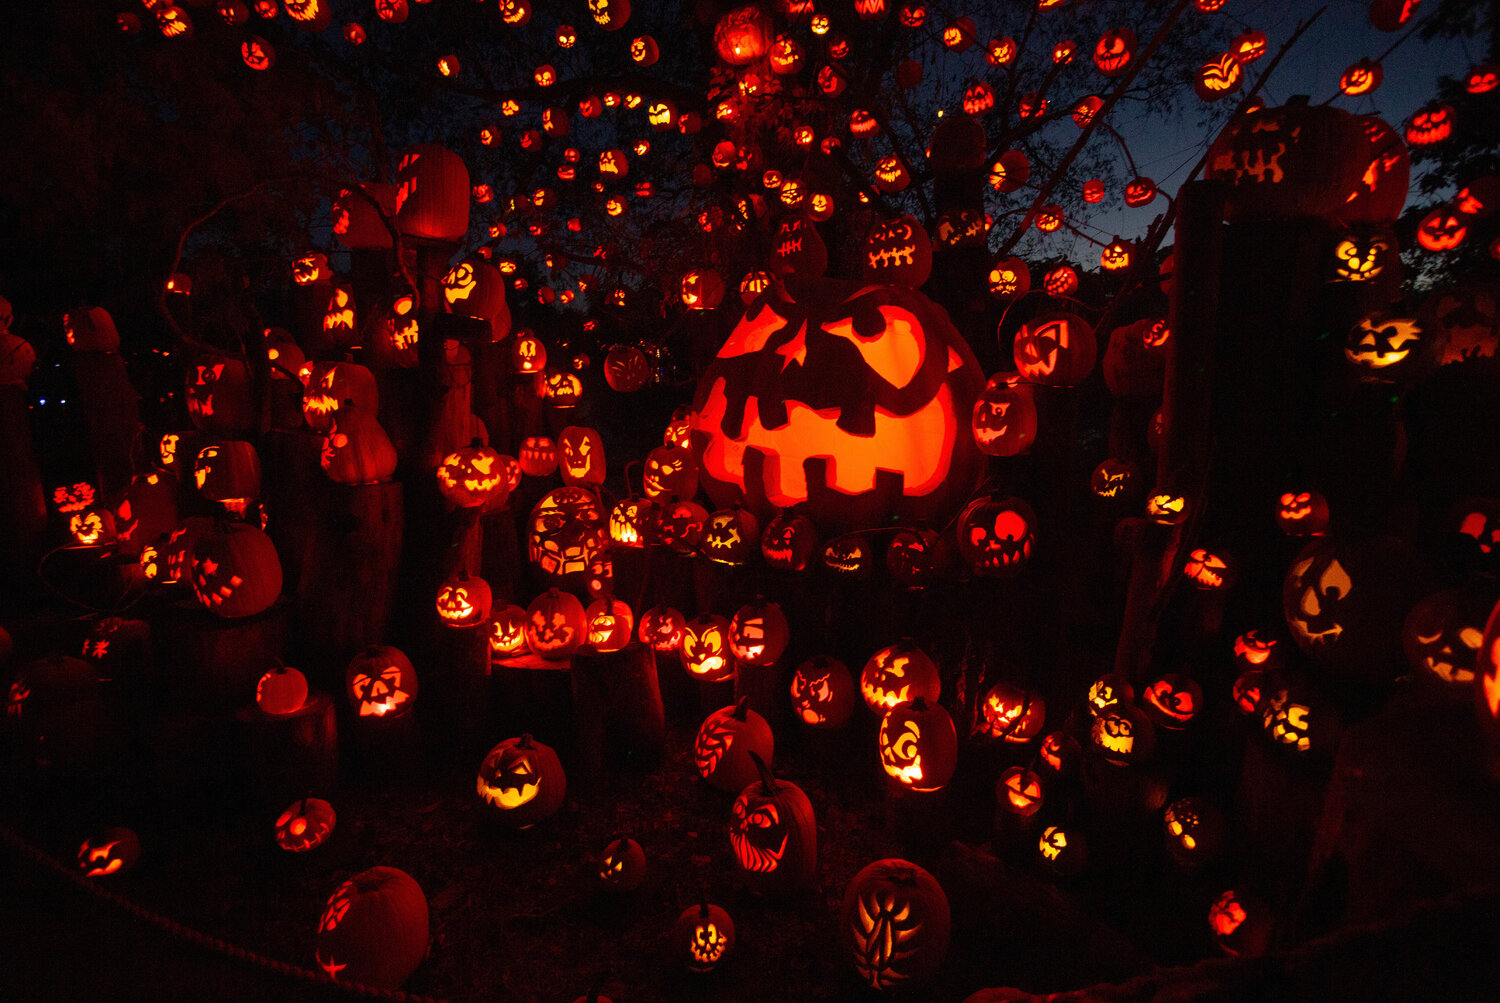 Pumpkins Around the World is the theme of this year’s Jack-O-Lantern Spectacular at RWP Zoo